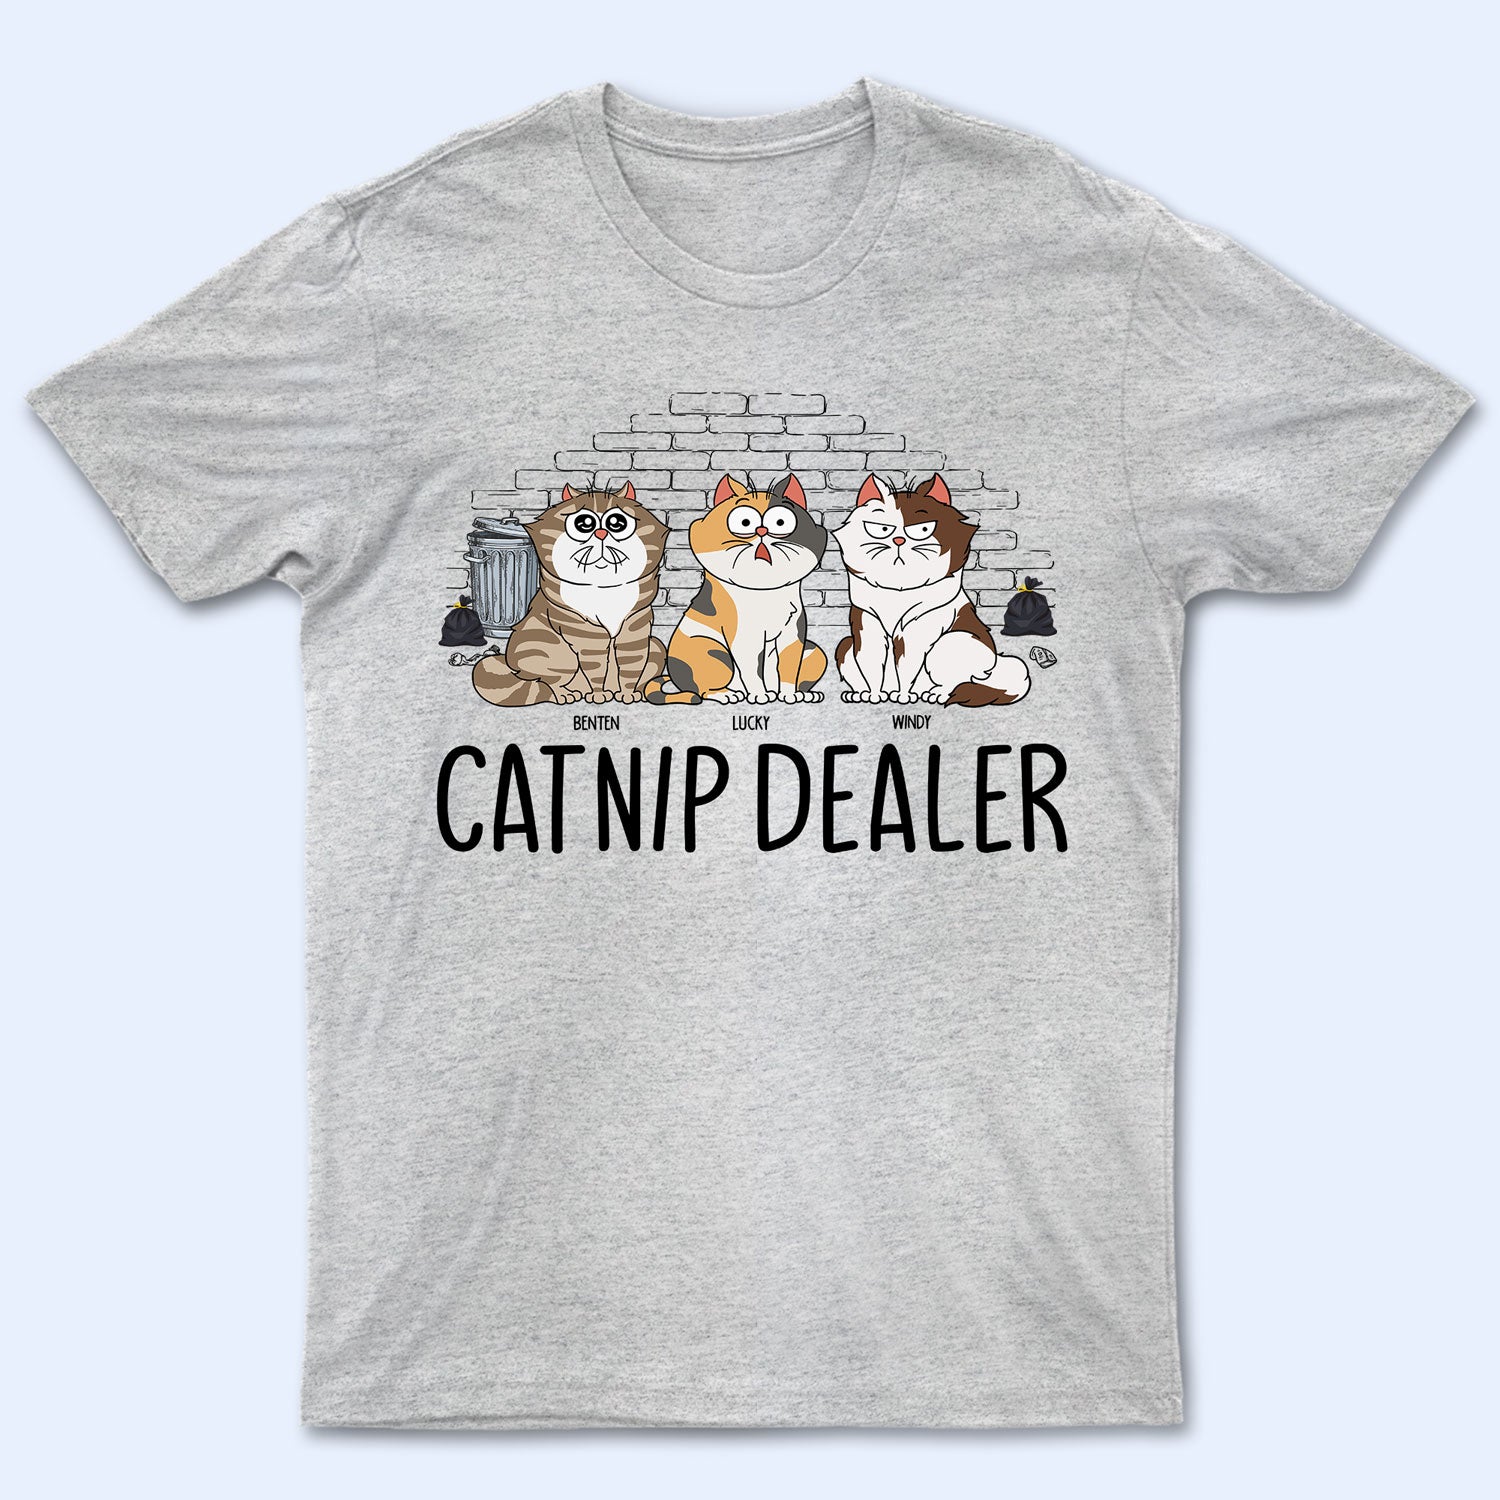 Catnip Dealer - Gift For Cat Lovers - Personalized T Shirt